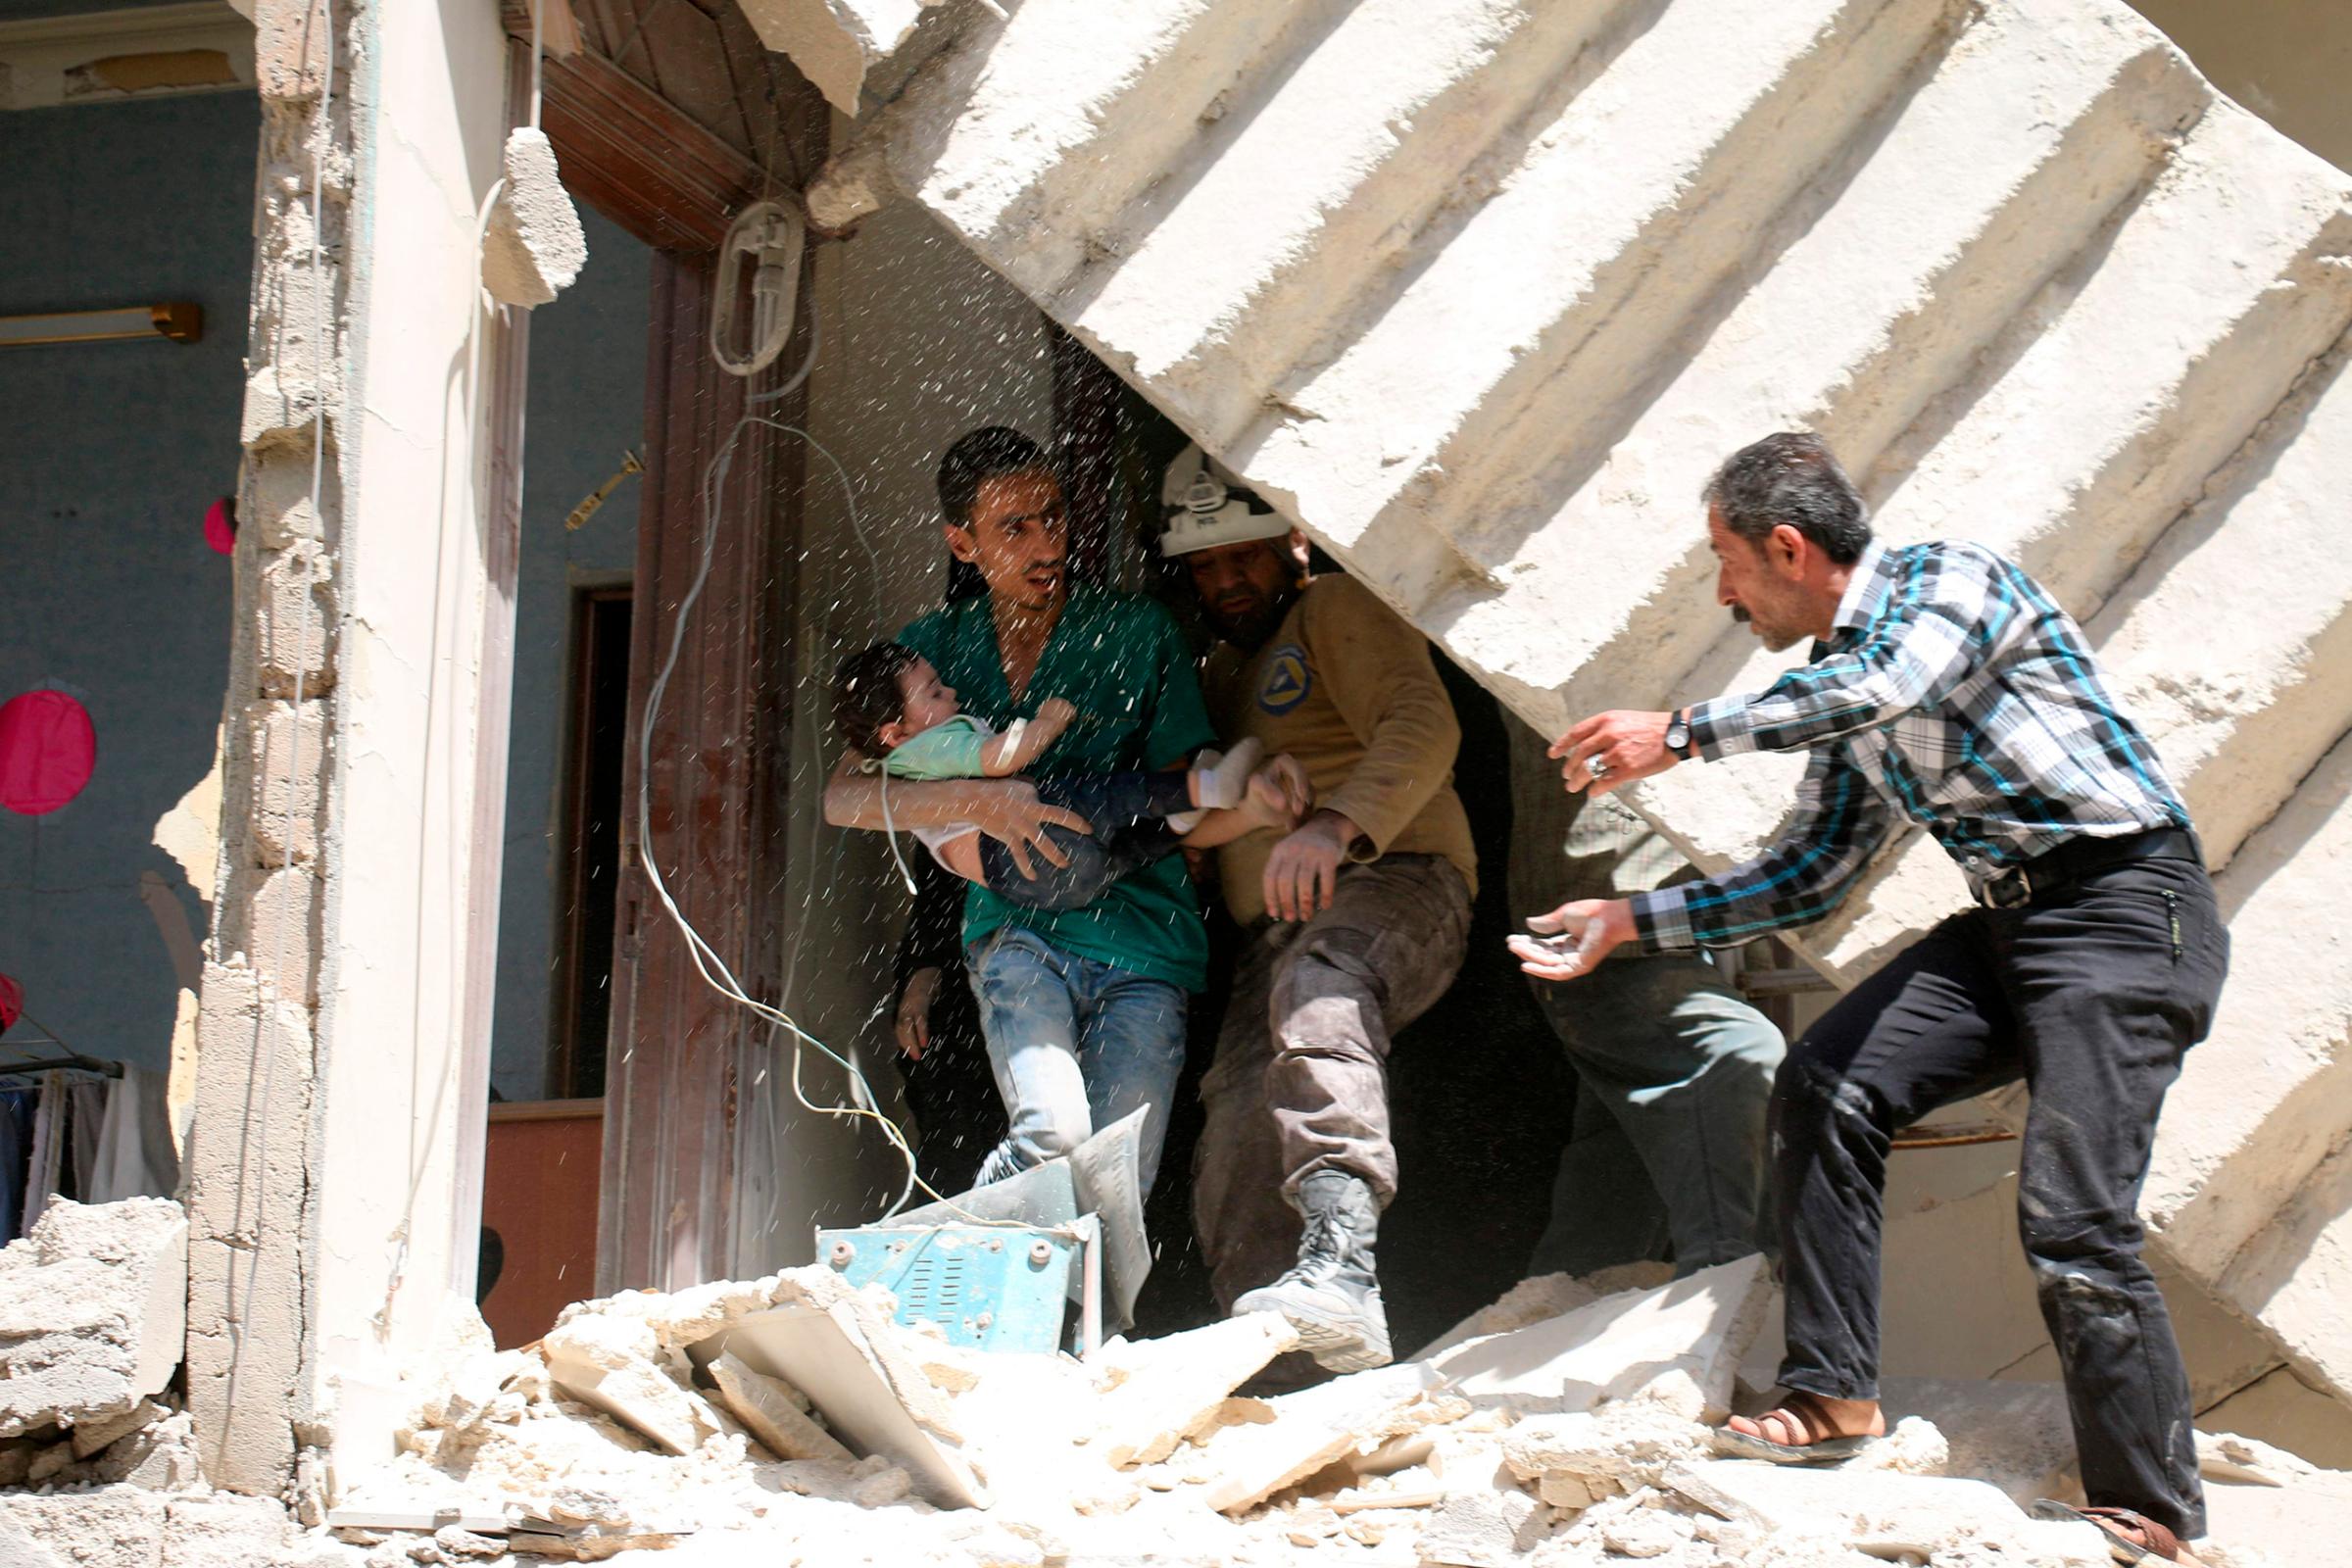 A man helps to evacuated a toddler from a destroyed building following a reported airstrike on a rebel-held neighborhood in Aleppo, Syria, April 28, 2016.